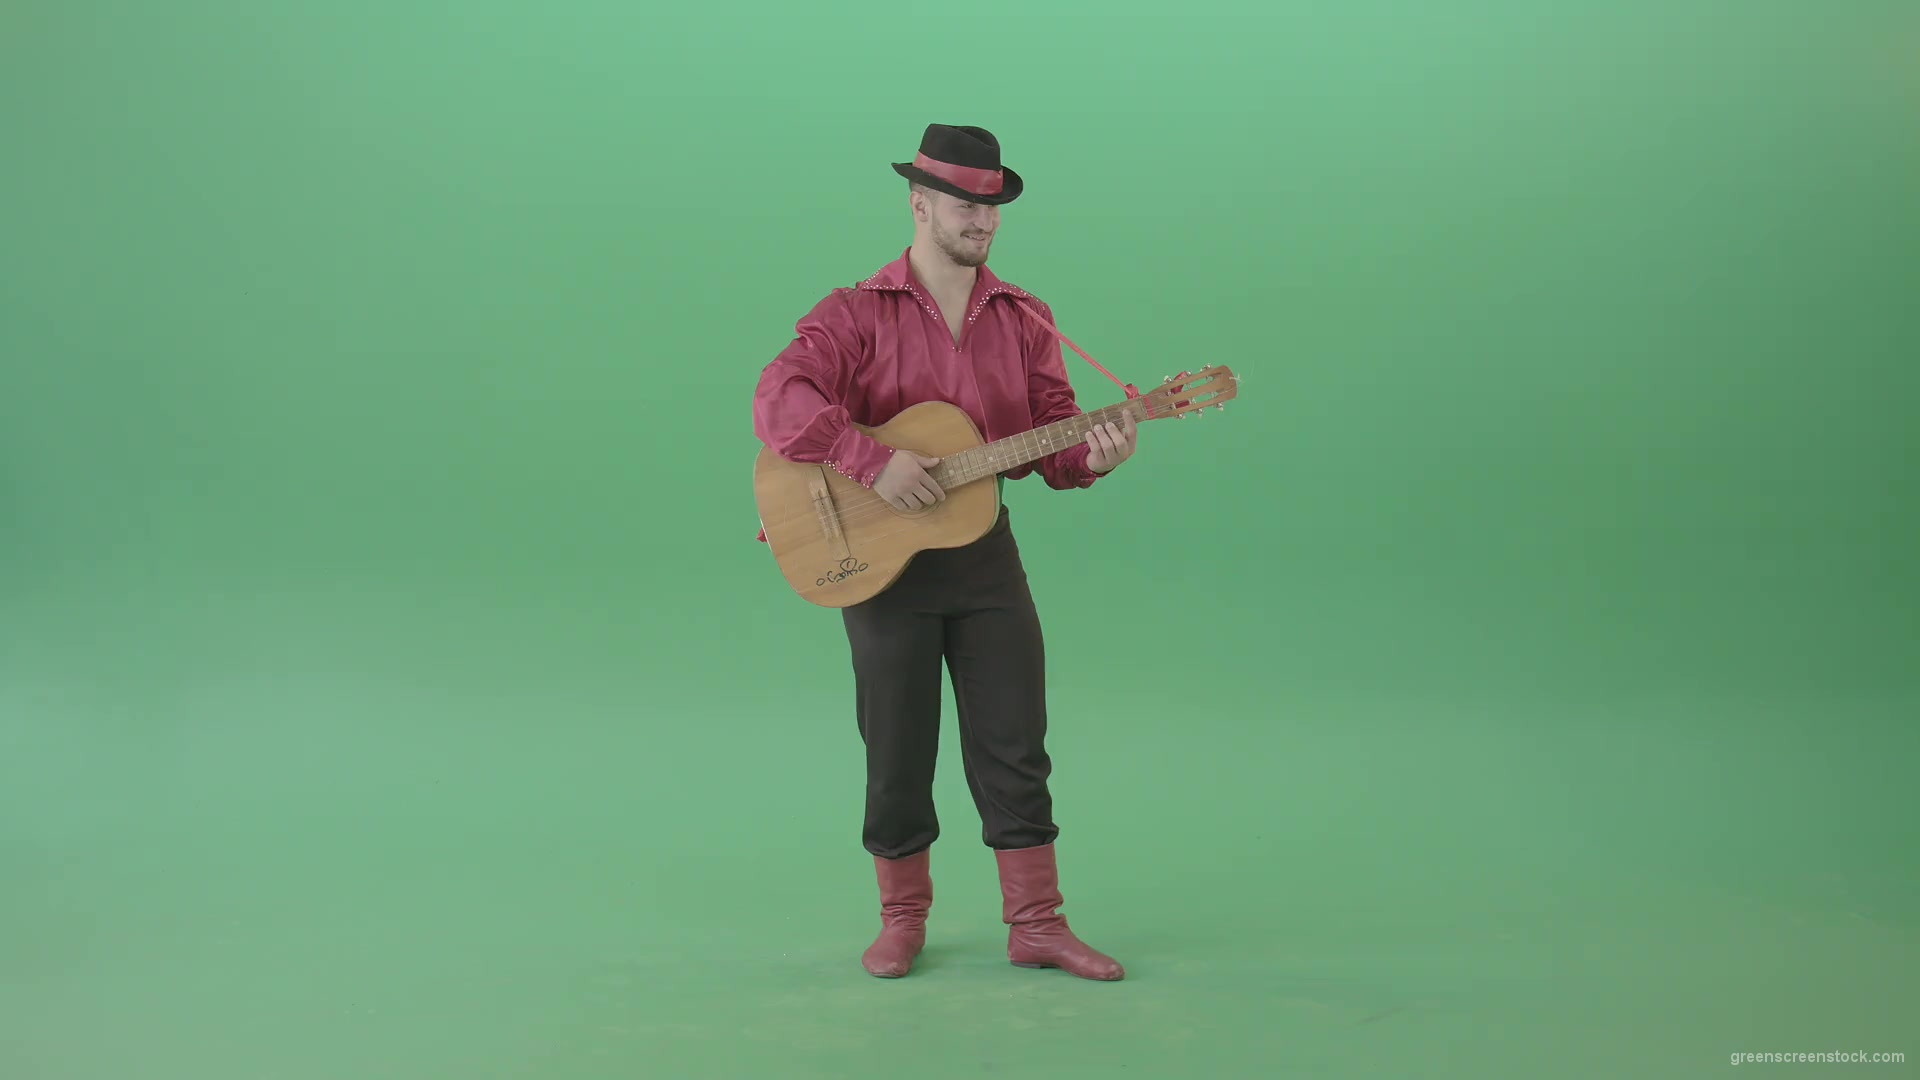 Balkan-Gipsy-man-in-red-shirt-playing-guitar-isolated-on-green-screen-4K-Video-Footage-1920_001 Green Screen Stock